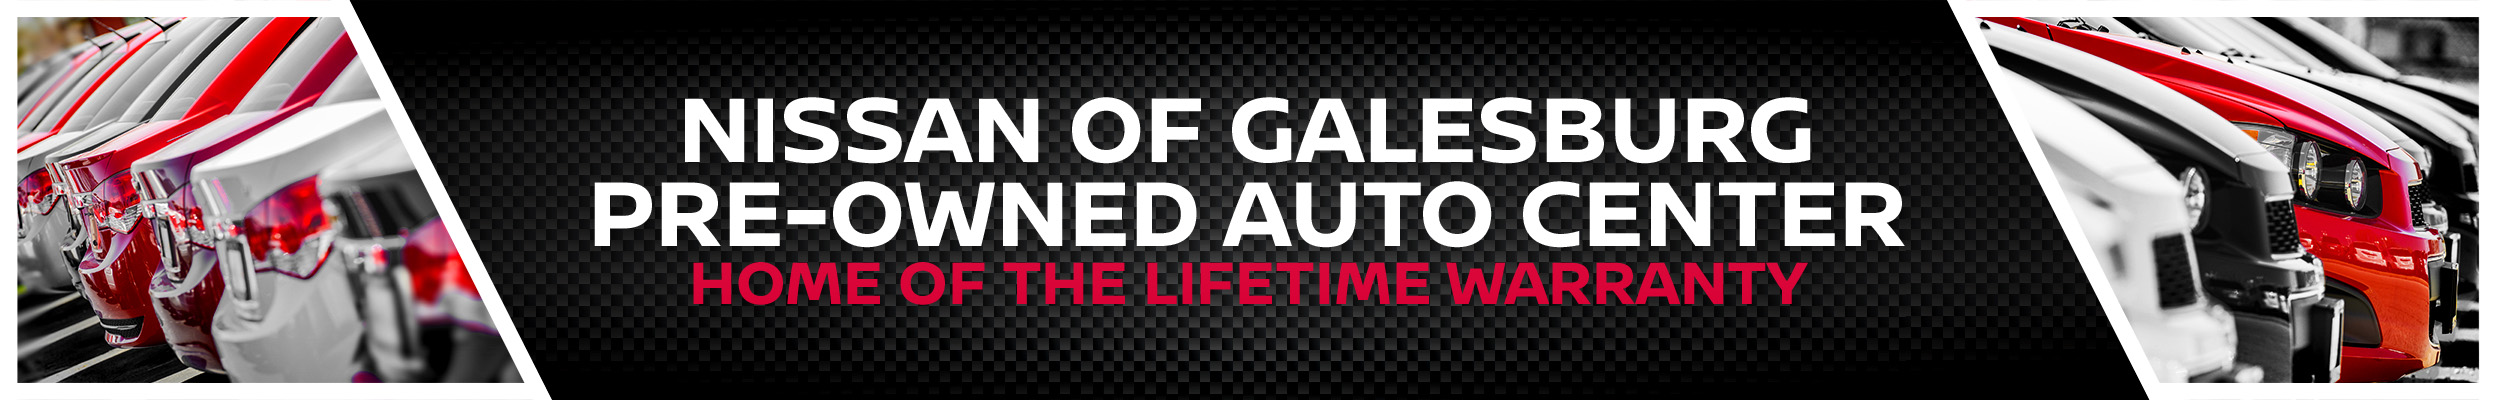 NissanOfGalesburg-Pre-Owned-2500x400